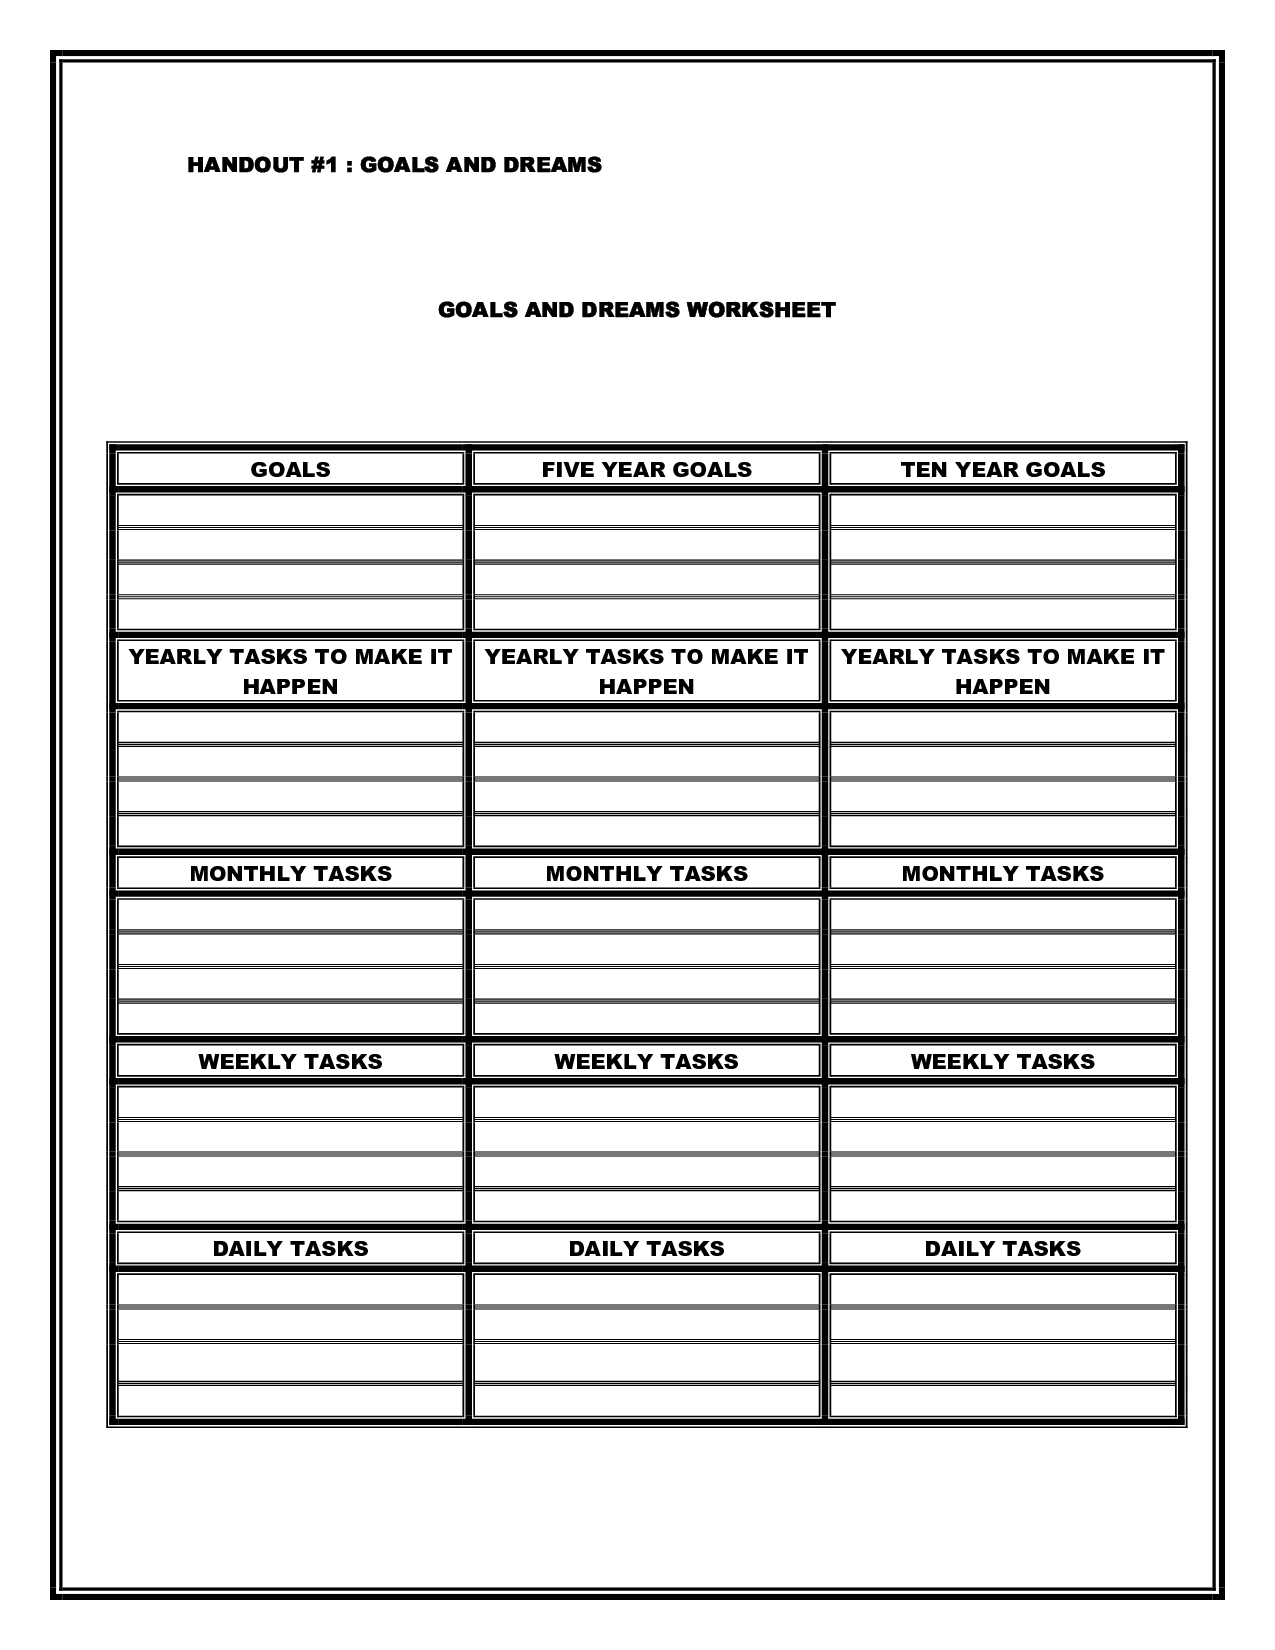 13 Healthy Boundaries Worksheets For Adults